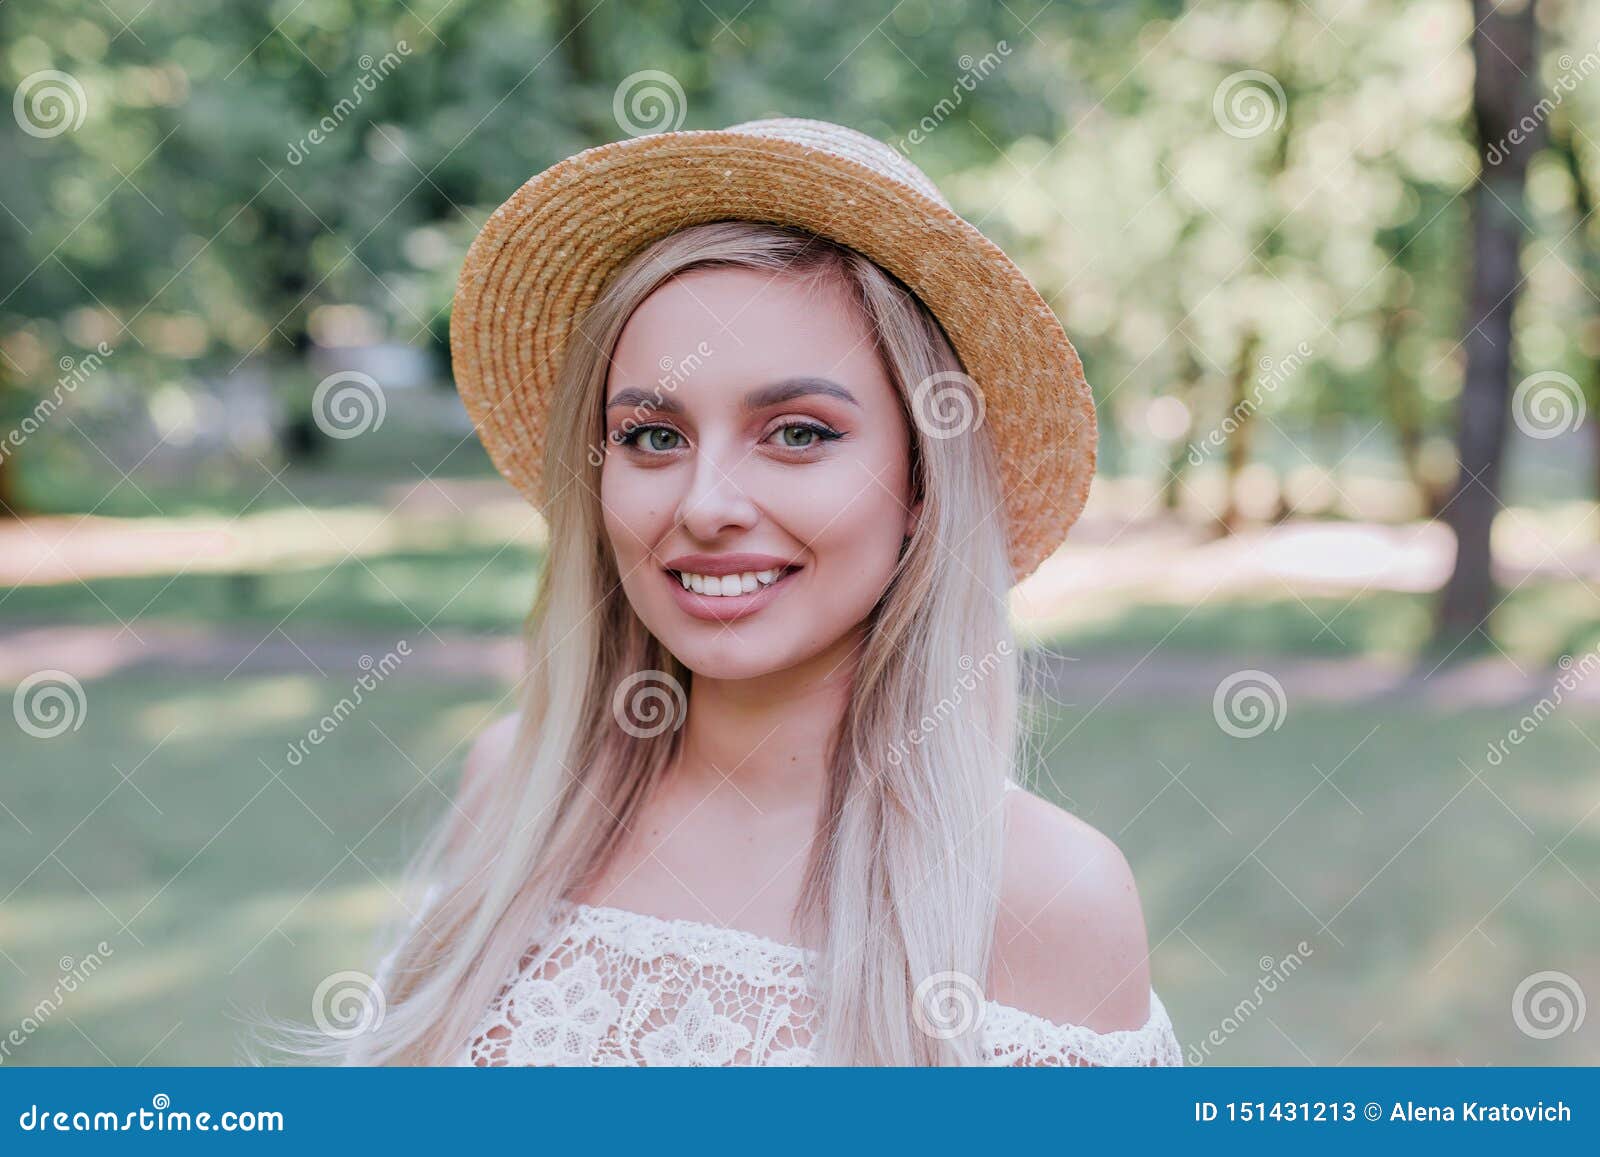 4. Blonde Hair Girl Images, Stock Photos & Vectors - wide 6